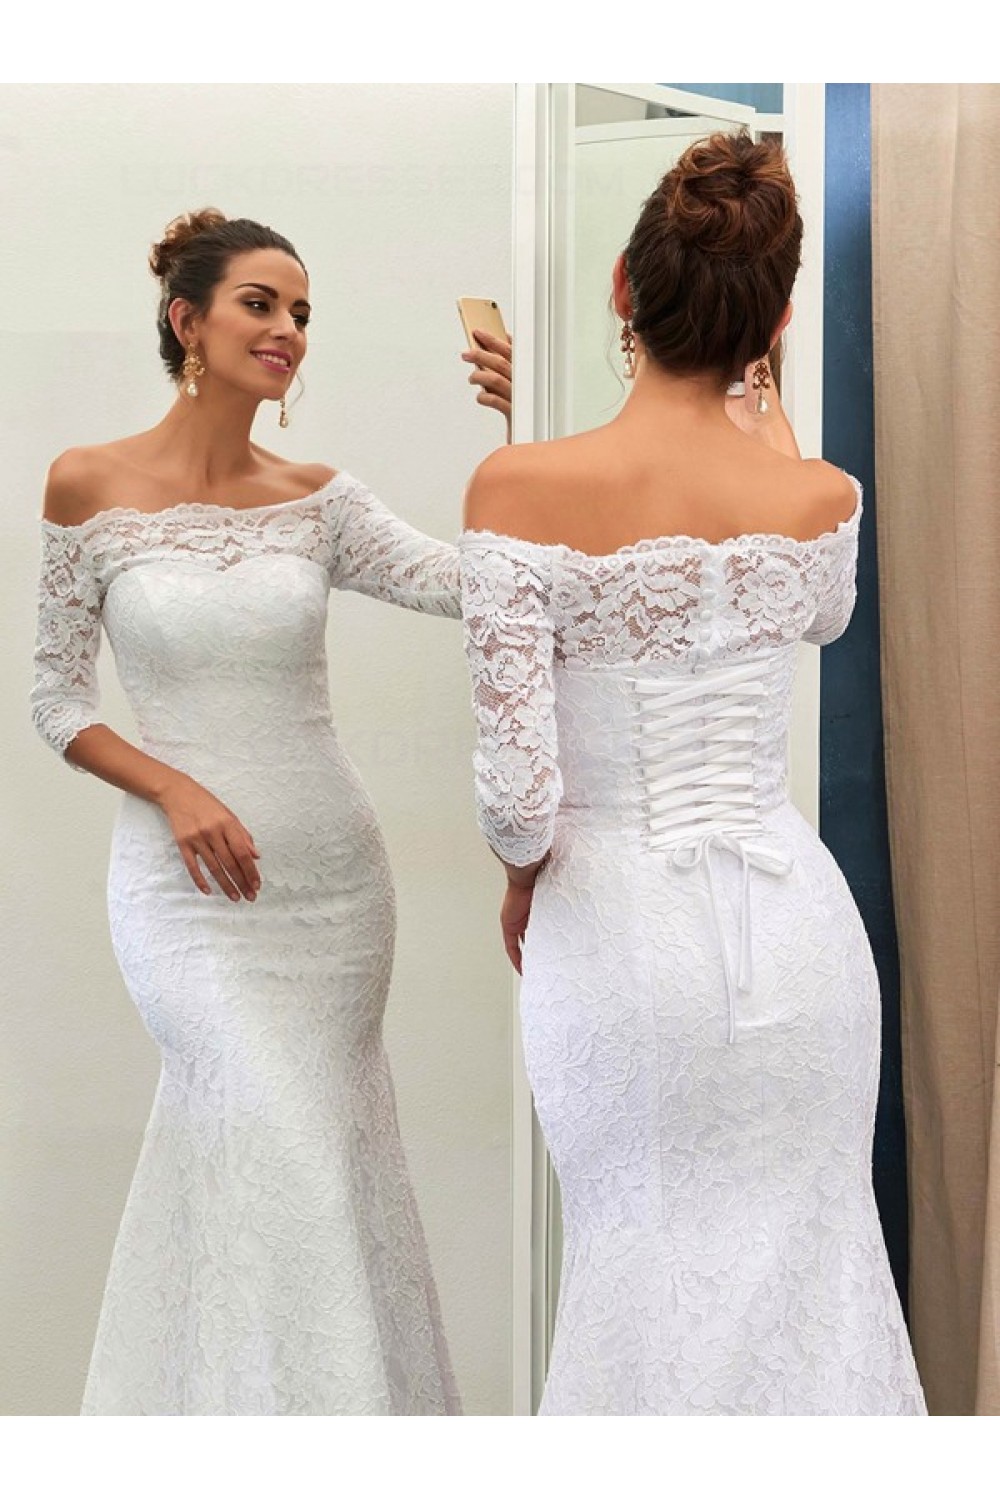 Amazing Lace Long Sleeve Mermaid Wedding Dress of the decade Check it out now 